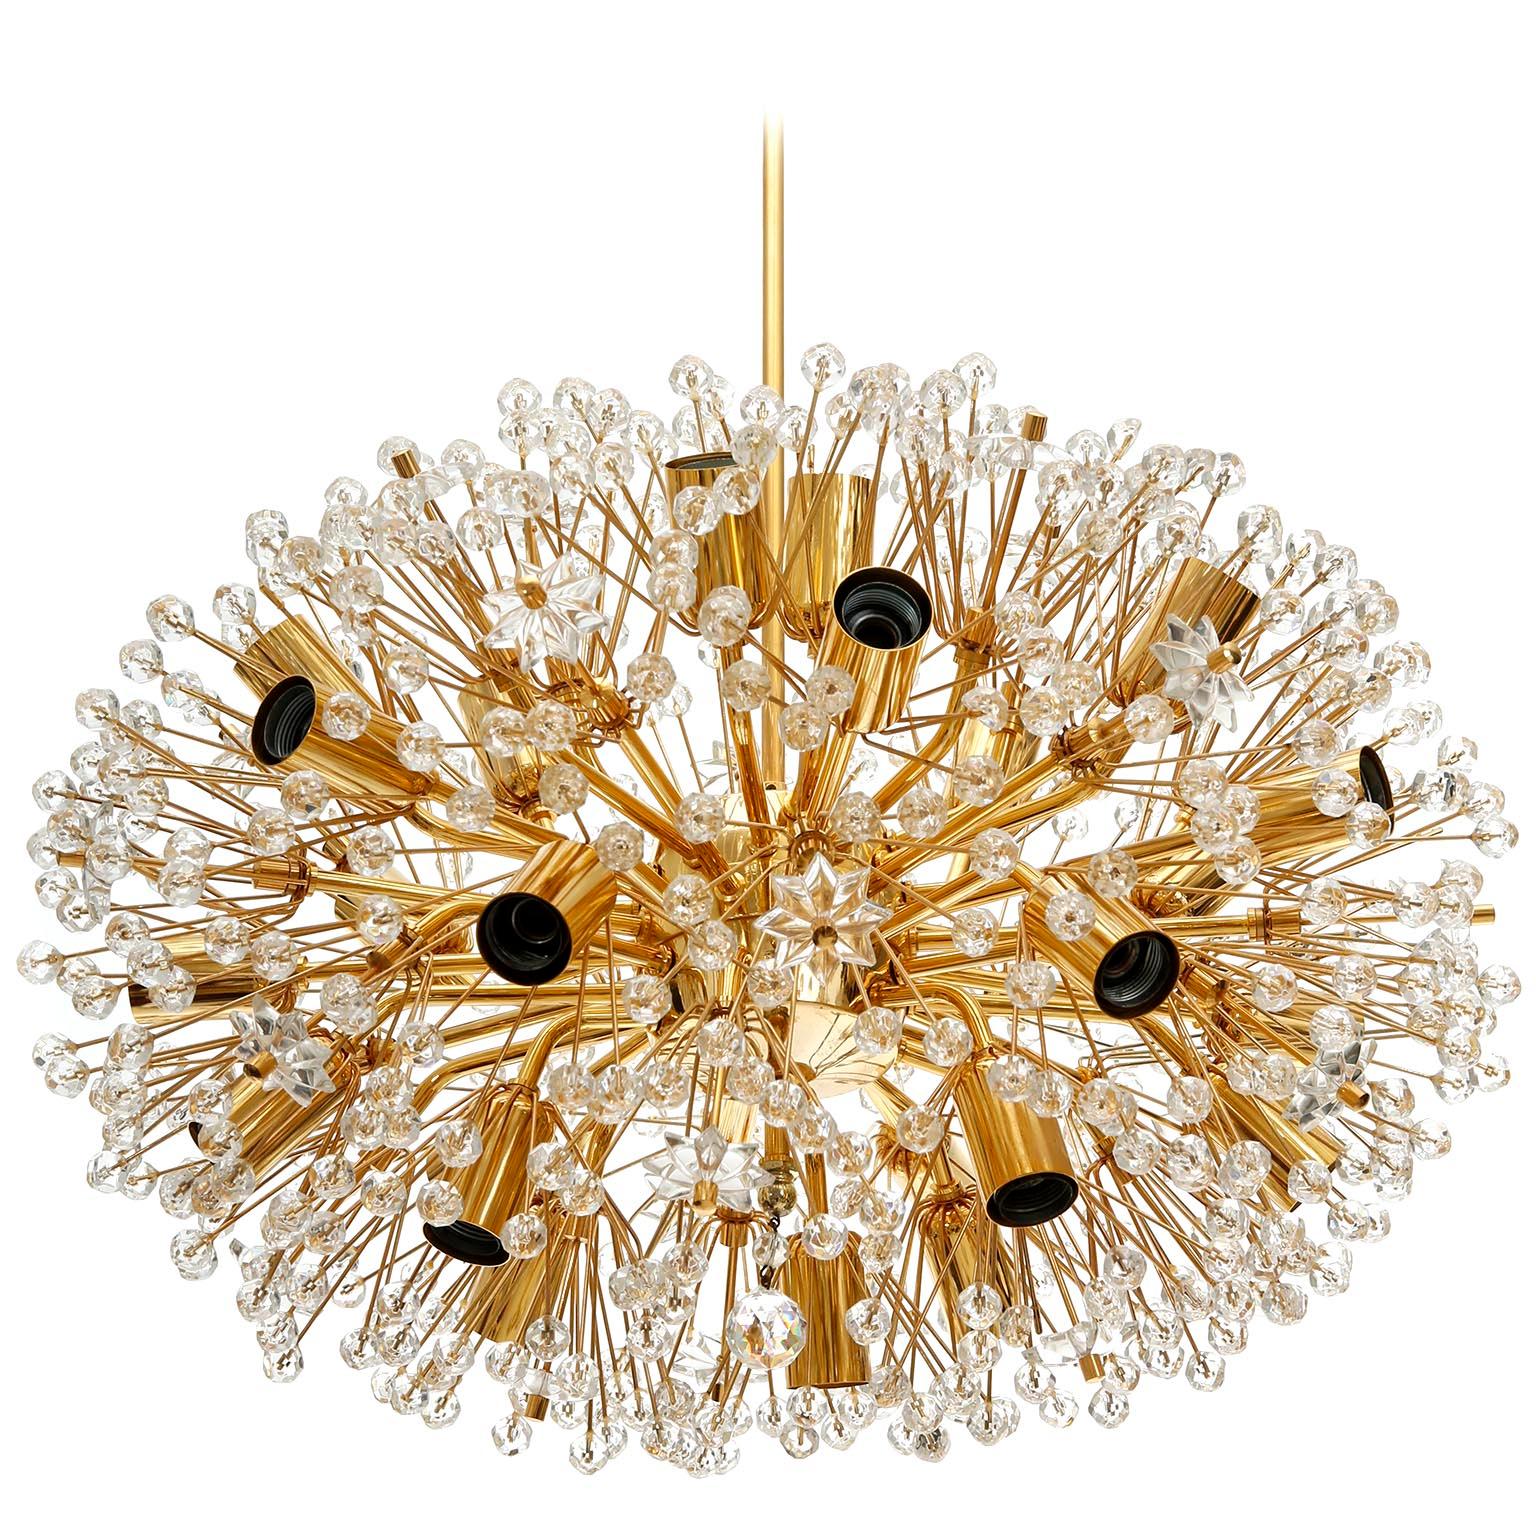 A large and oval shaped Sputnik chandelier designed by Emil Stejnar and manufactured in midcentury, circa 1970.
This beautiful light fixture is made of a 24-carat gold-plated brass frame which is decorated with cut glass in the form of beads and